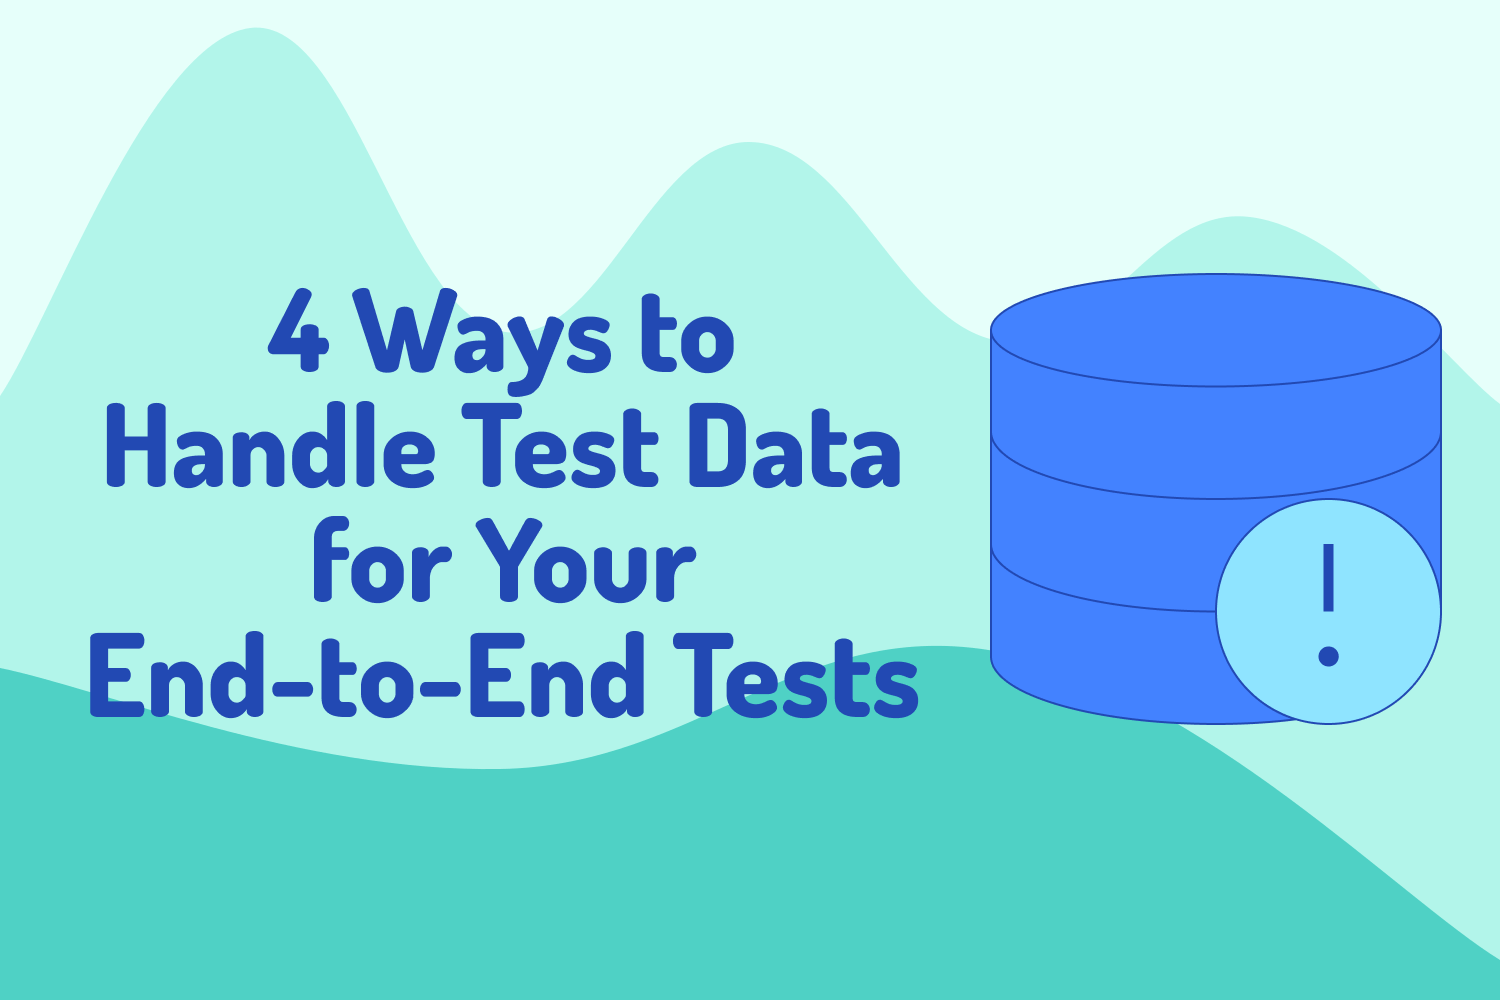 4 Ways to Handle Test Data for Your End-to-End Tests